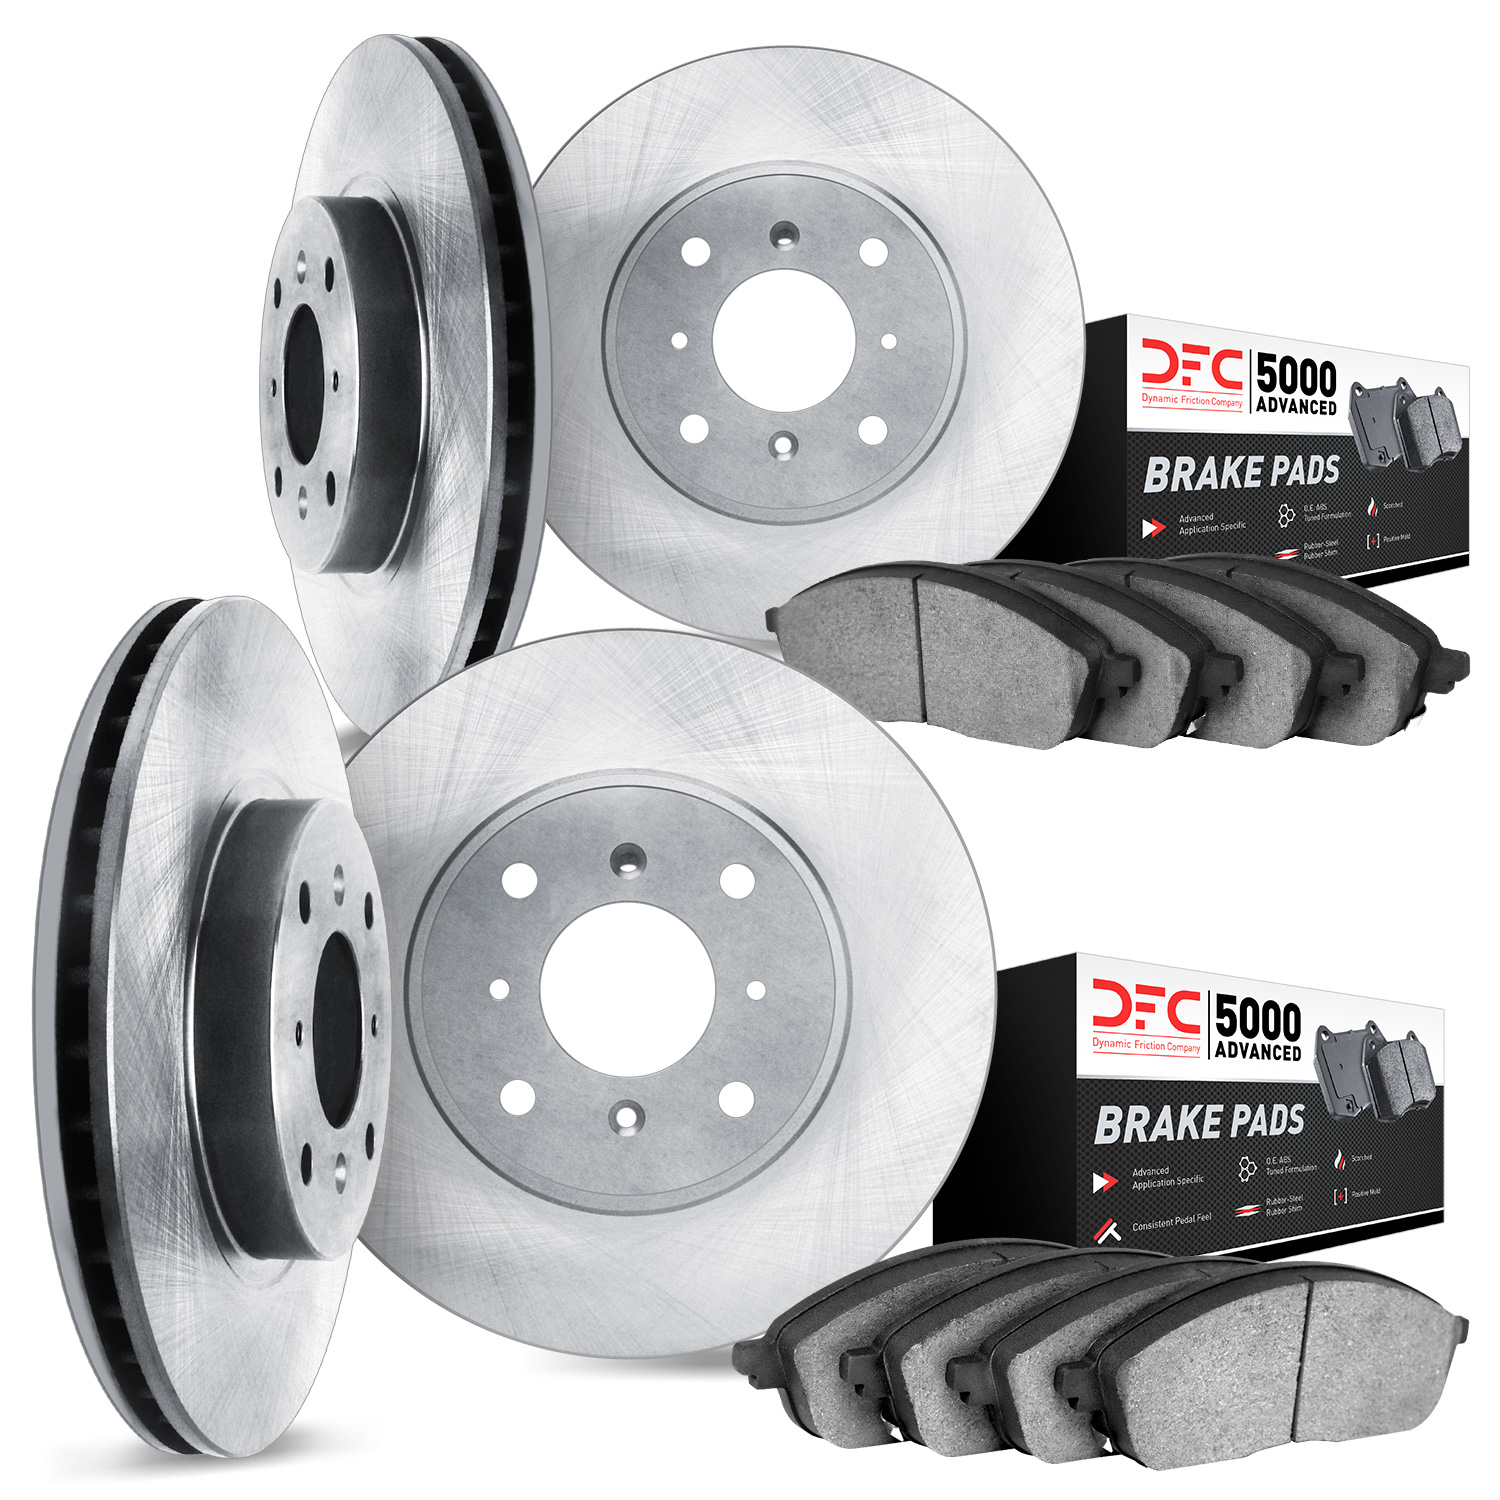 6504-56100 Brake Rotors w/5000 Advanced Brake Pads Kit, 1998-2000 Ford/Lincoln/Mercury/Mazda, Position: Front and Rear